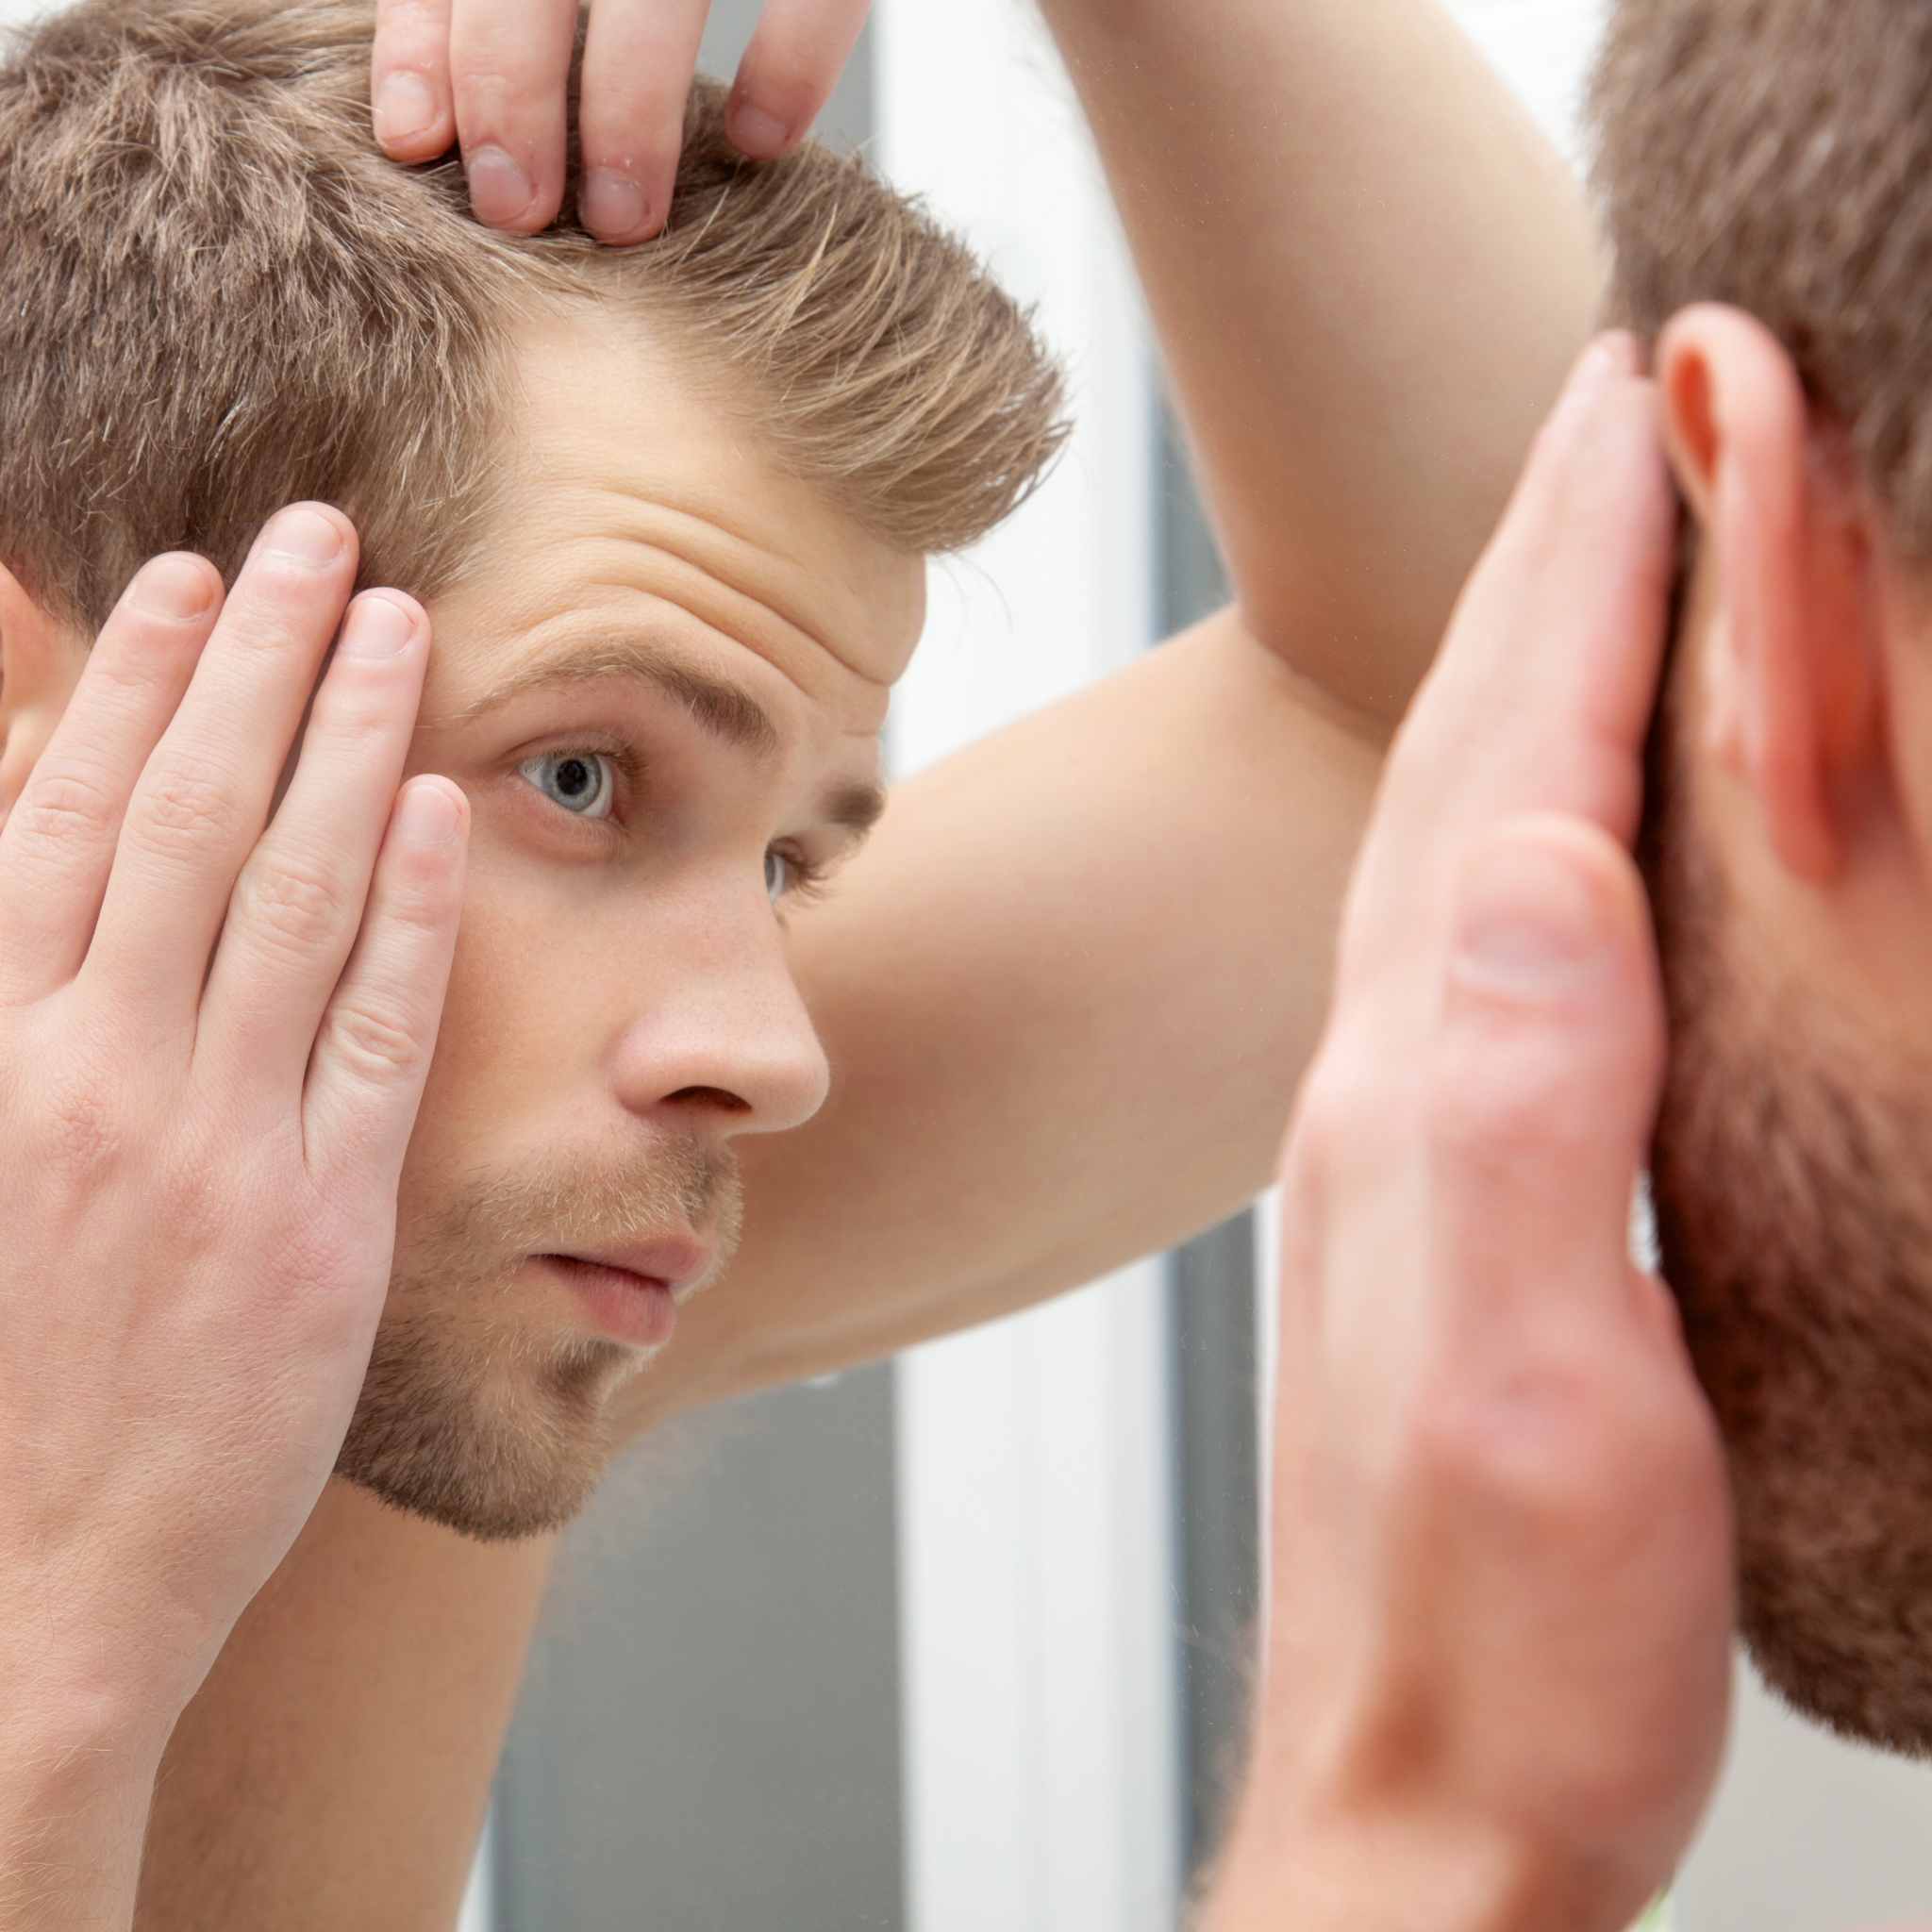 Hair Loss Symtoms - Causes, Signs & Problems of Pattern Baldness